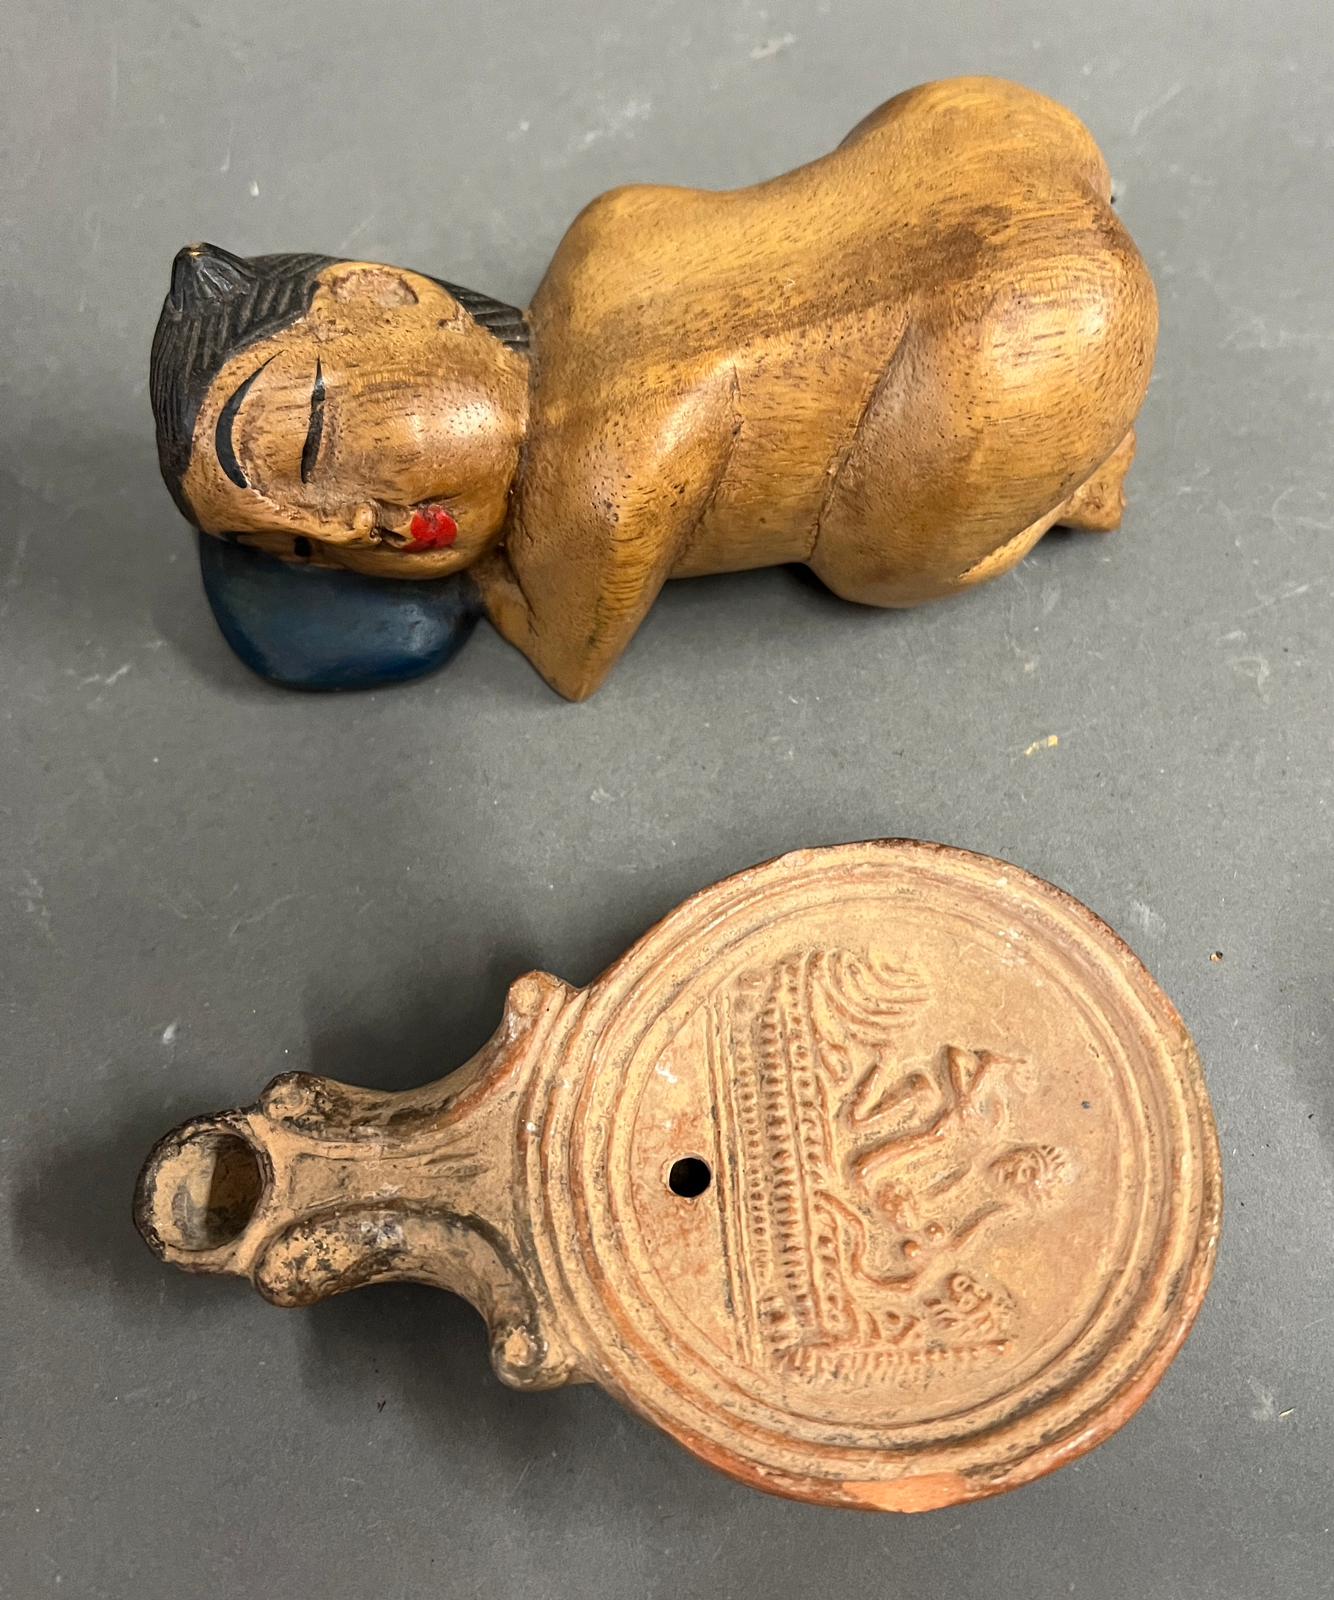 Terracotta lamp along with a Thai wooden statue - Image 2 of 2